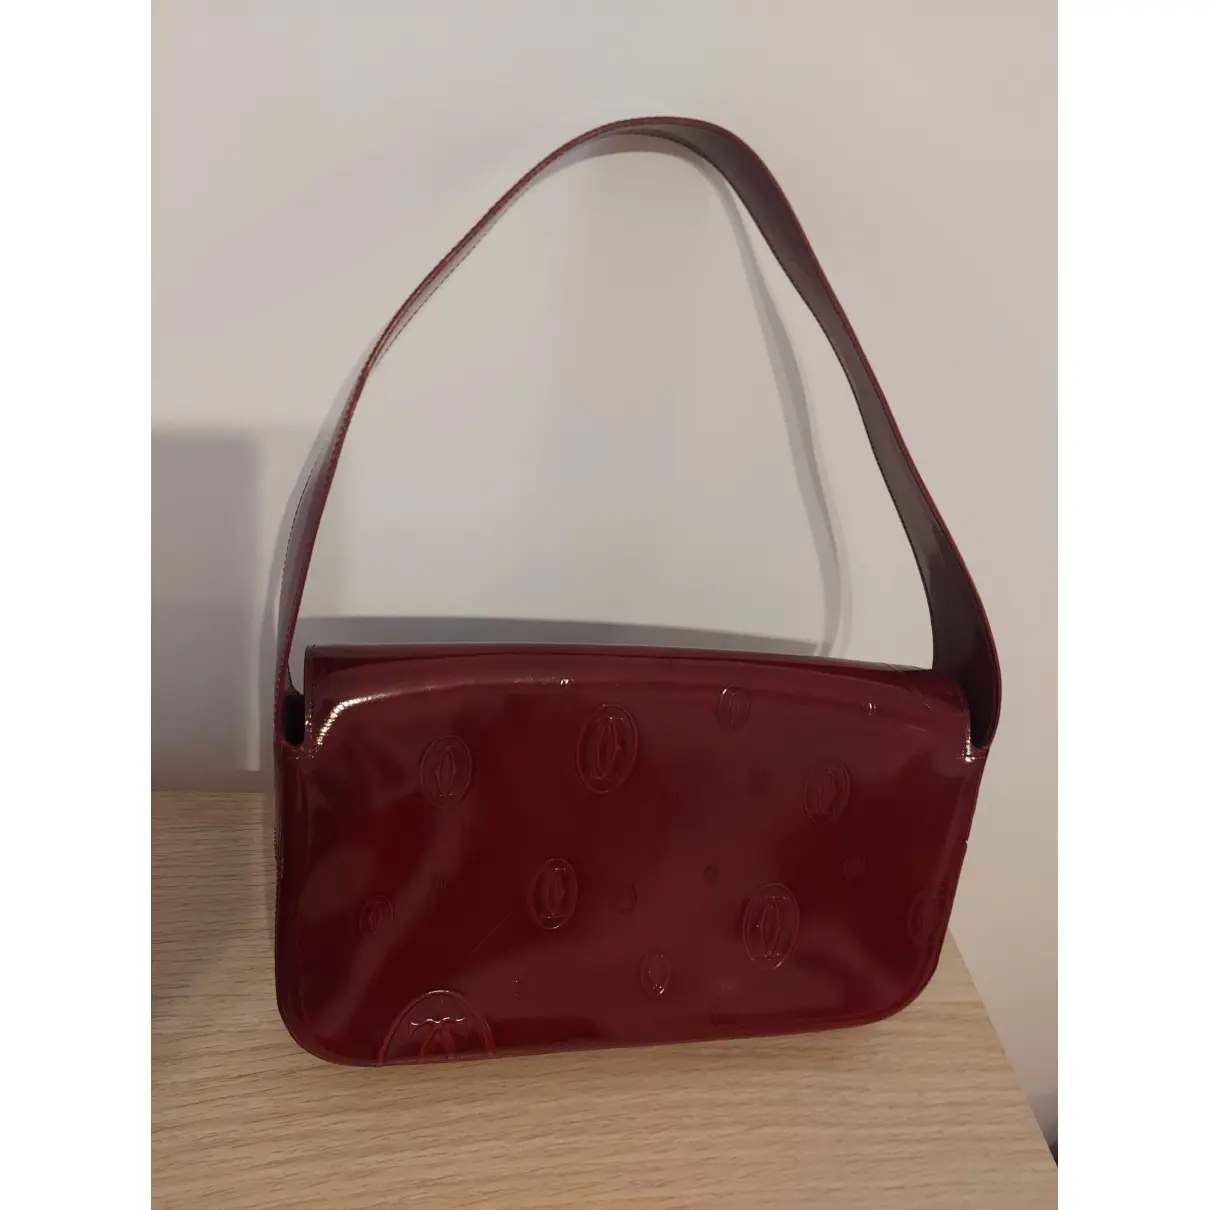 Buy Cartier Patent leather bag online